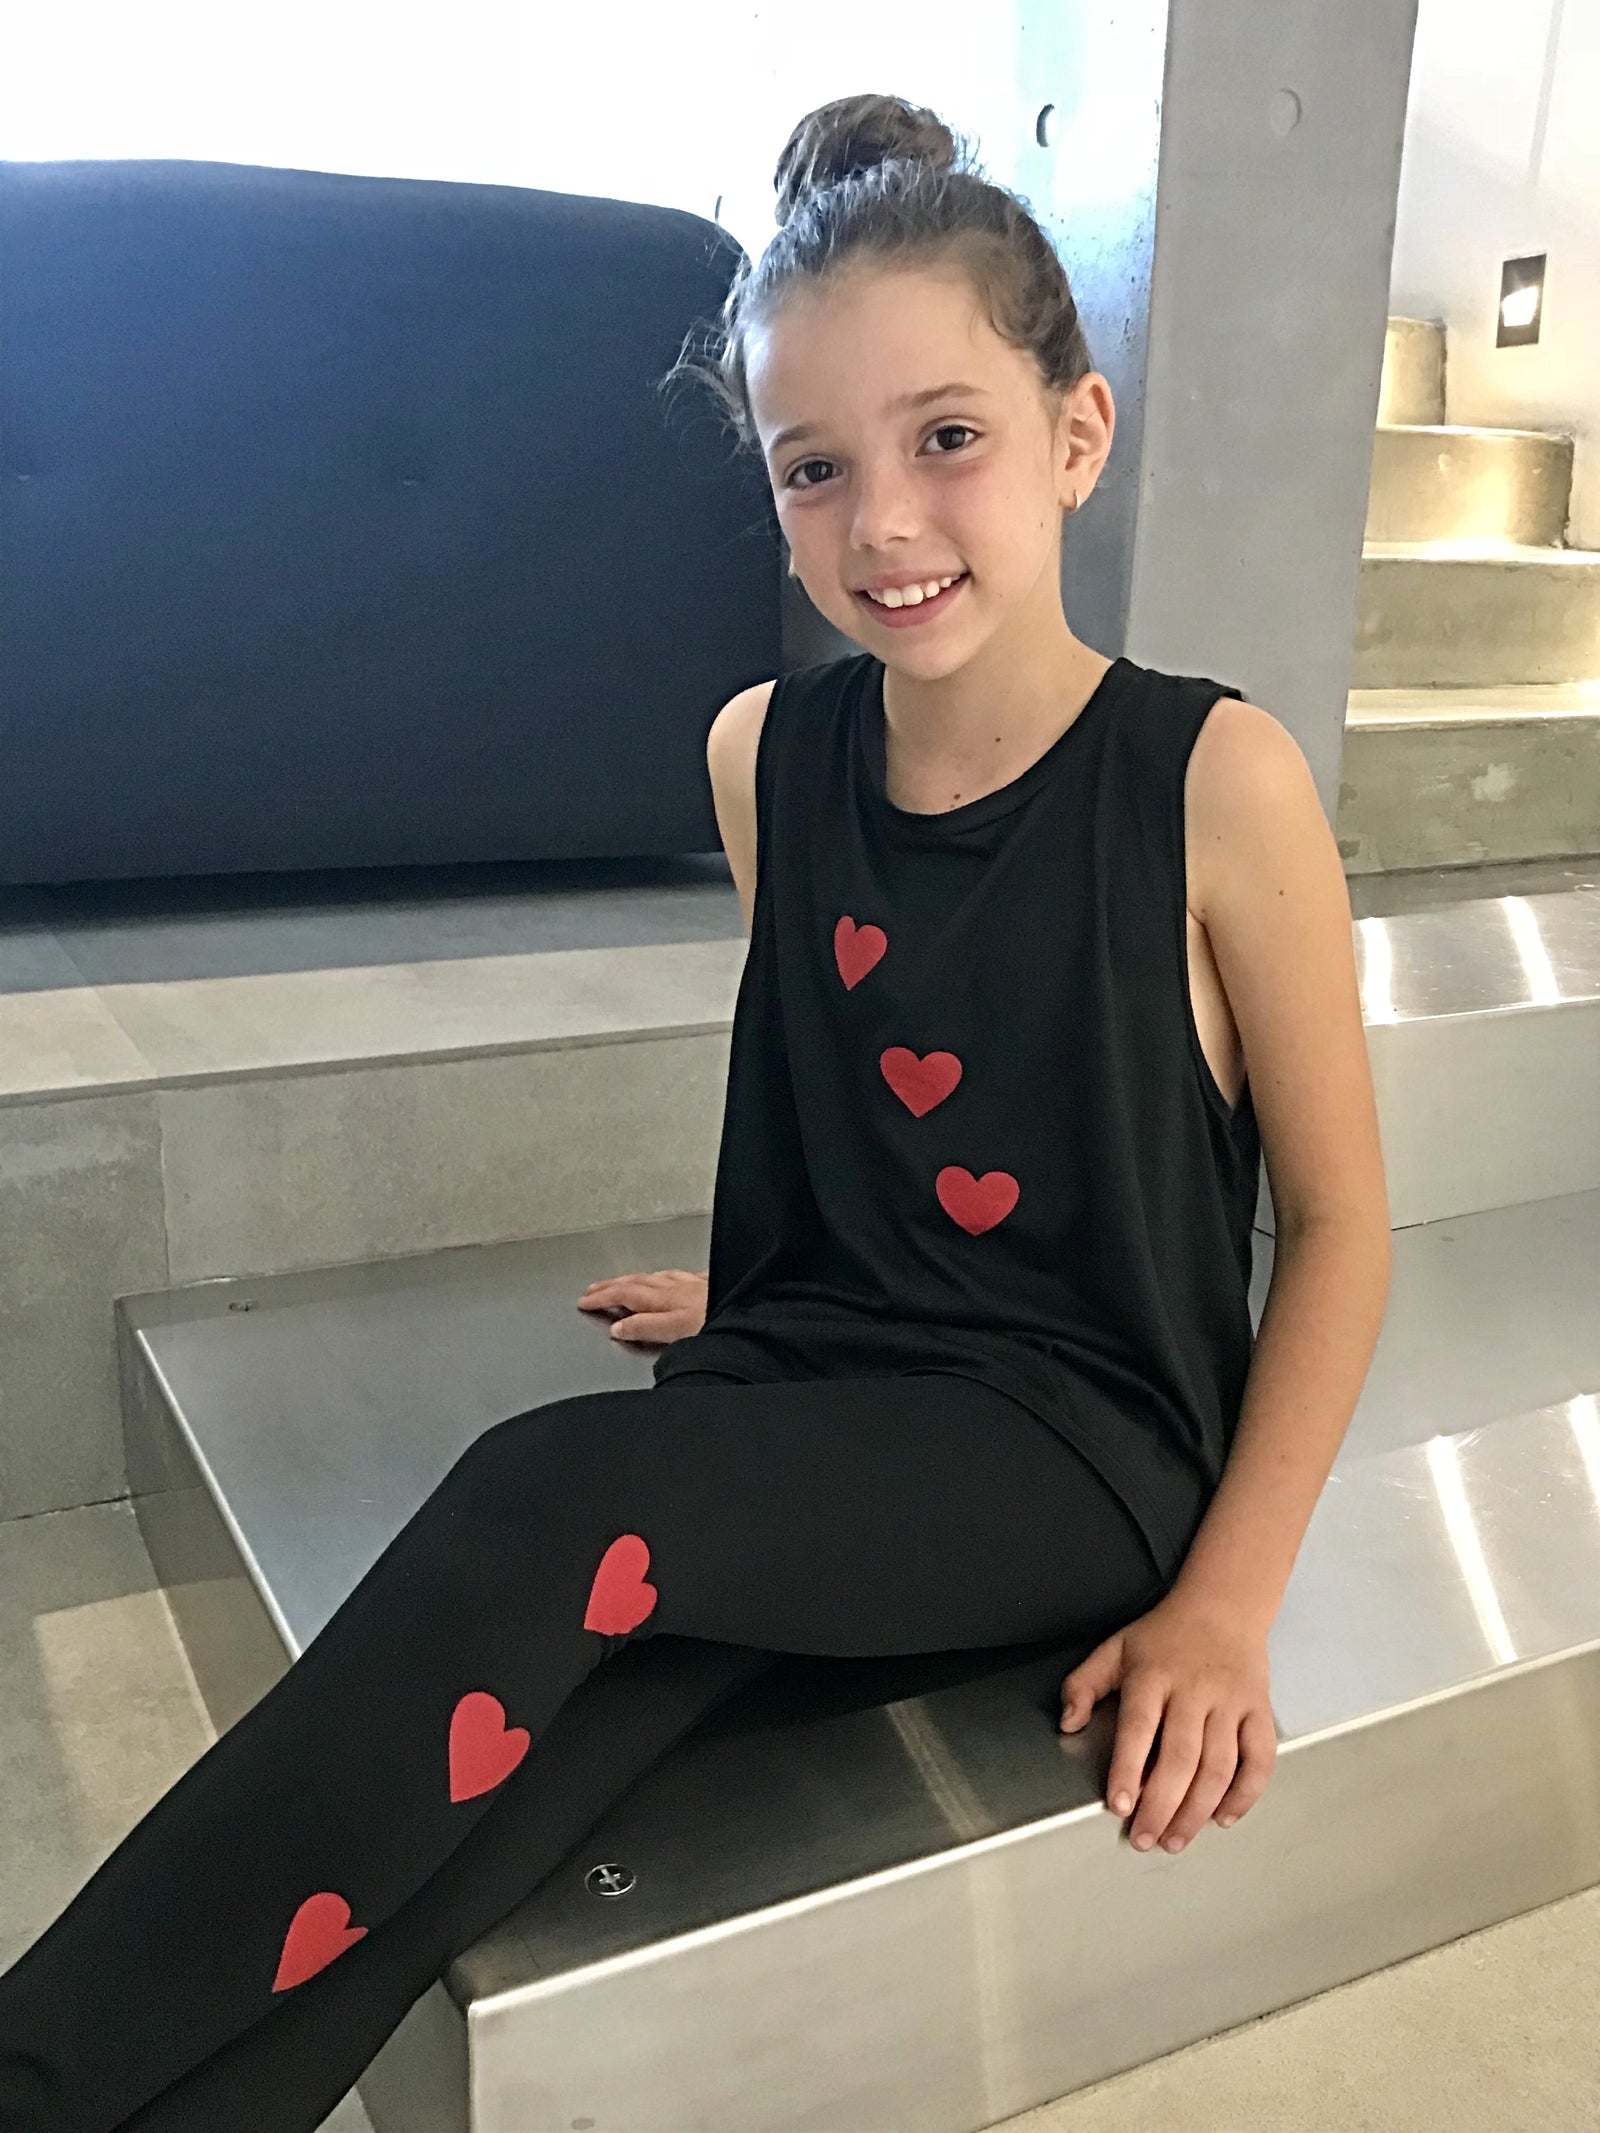 Hearts Red Black Dry Fit Sleeveless Kids Girl's Tank